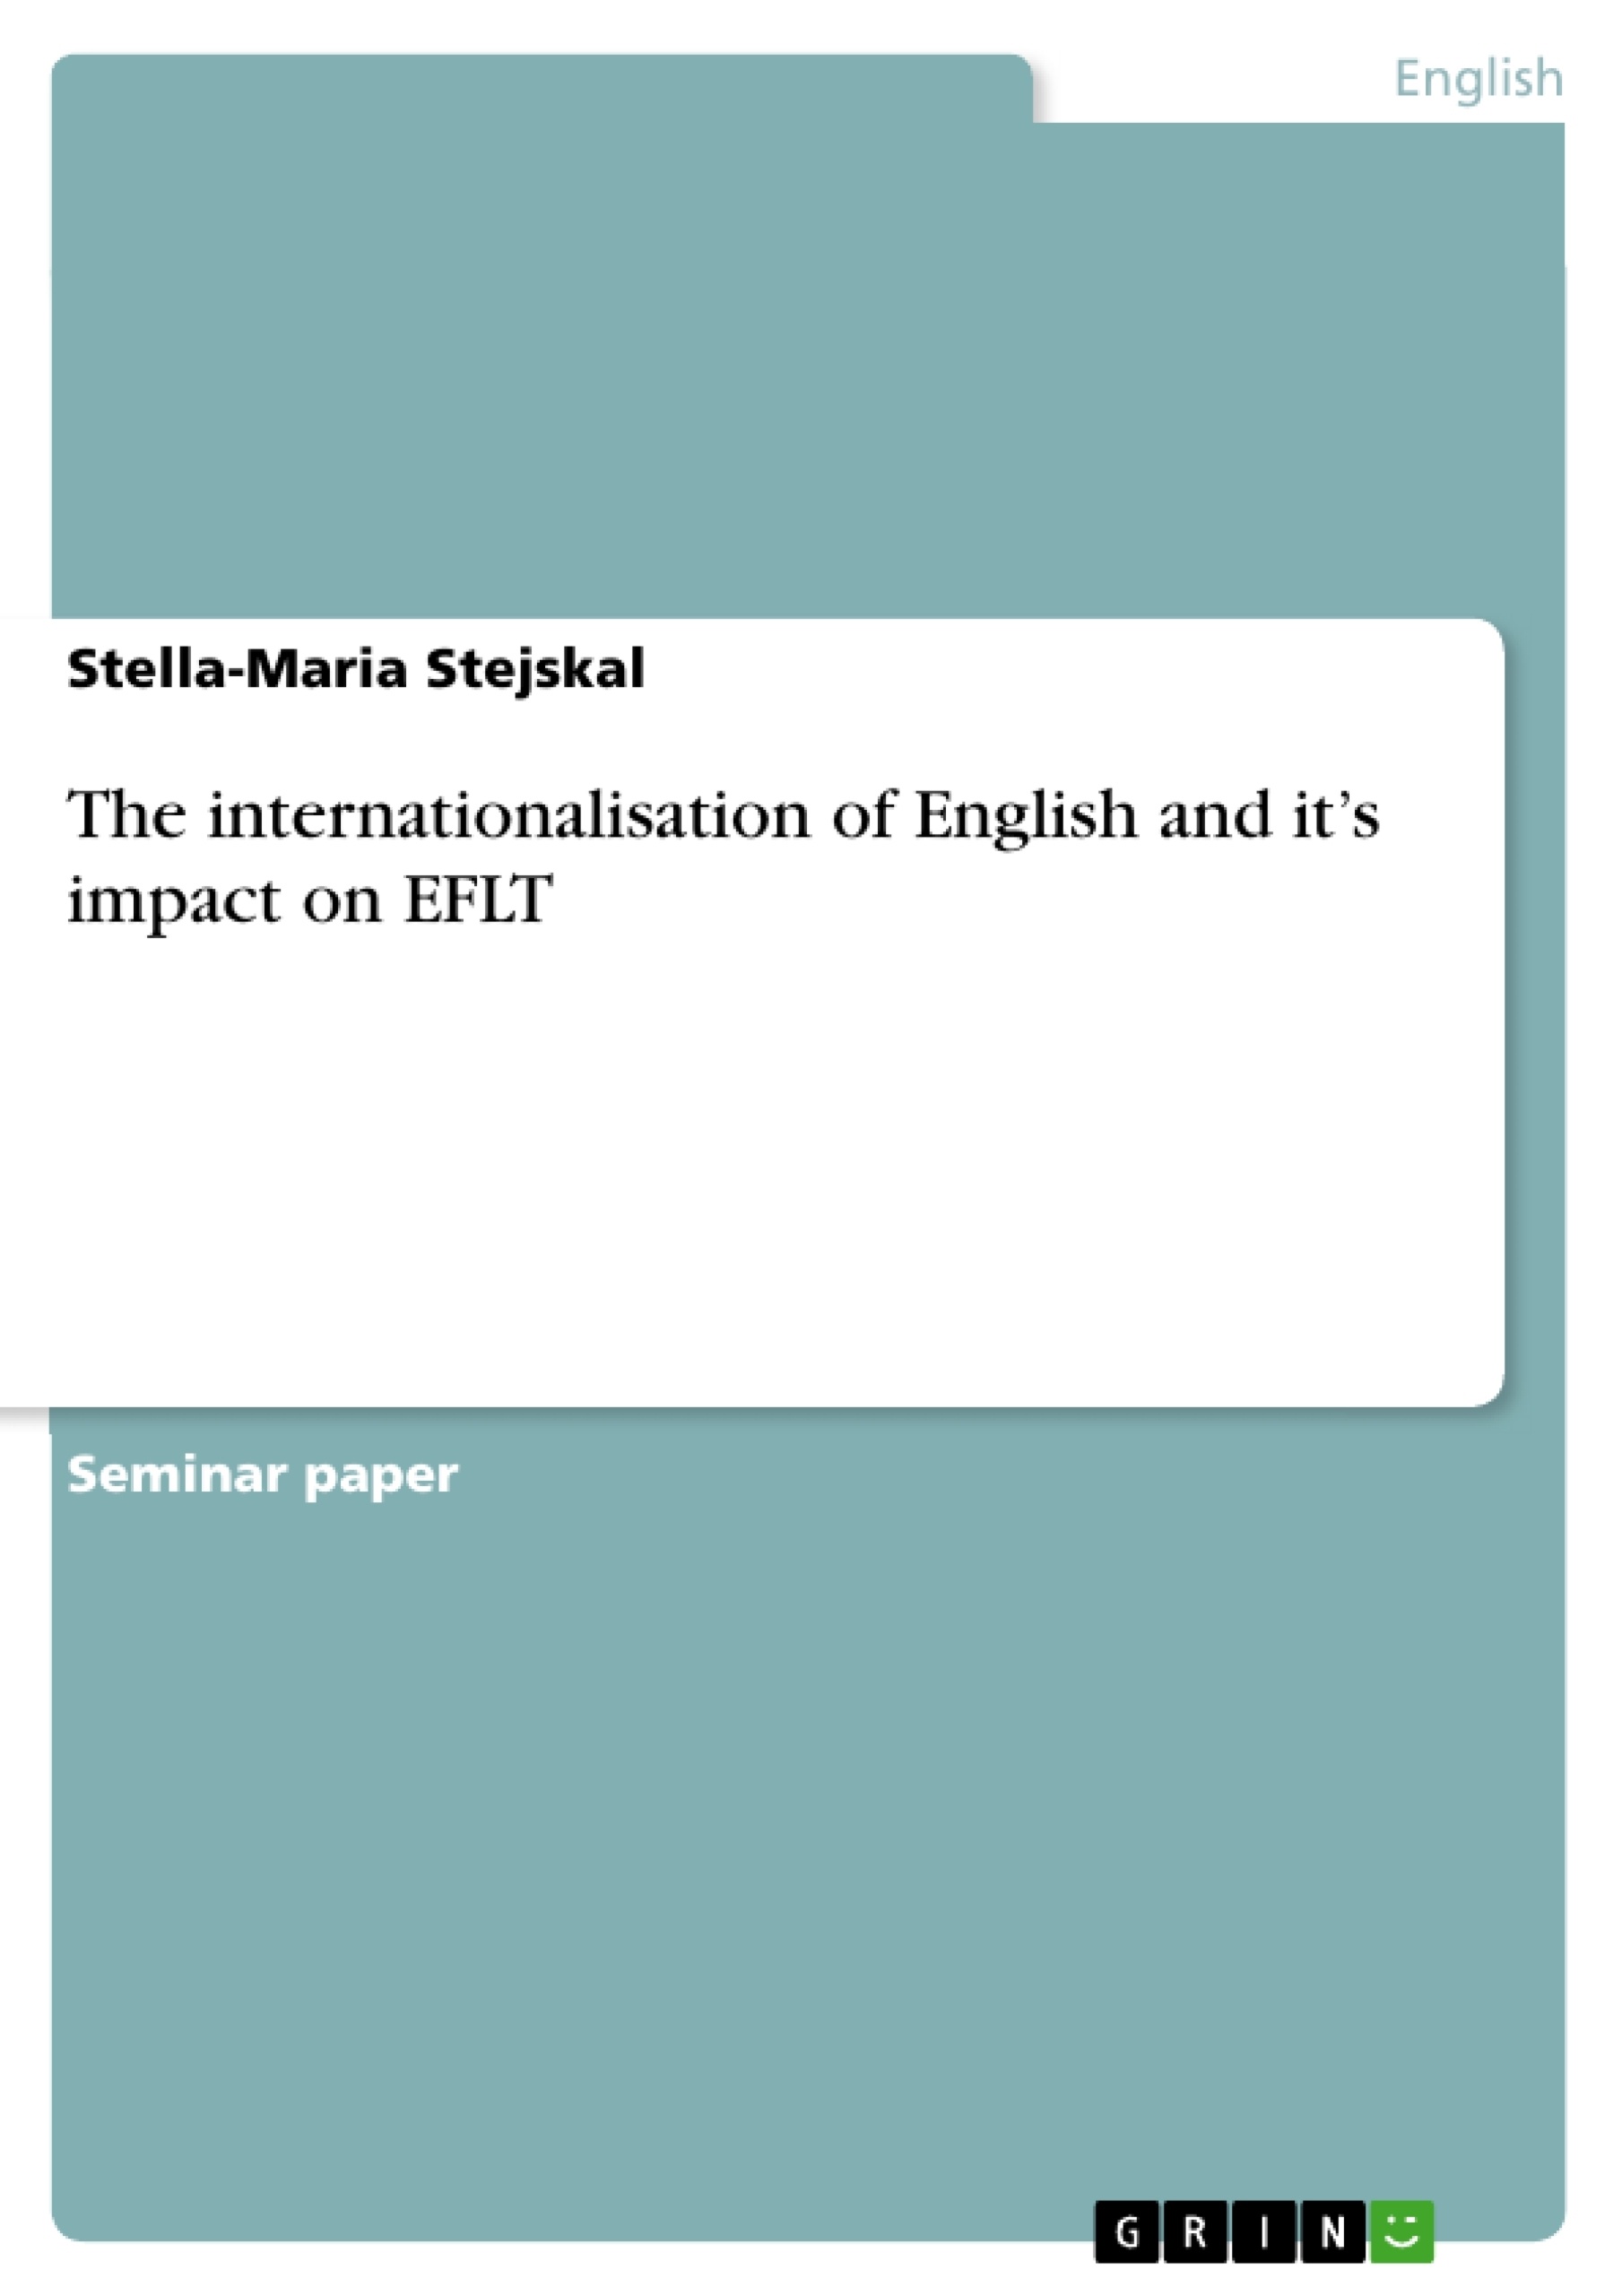 Título: The internationalisation of English and it’s impact on EFLT